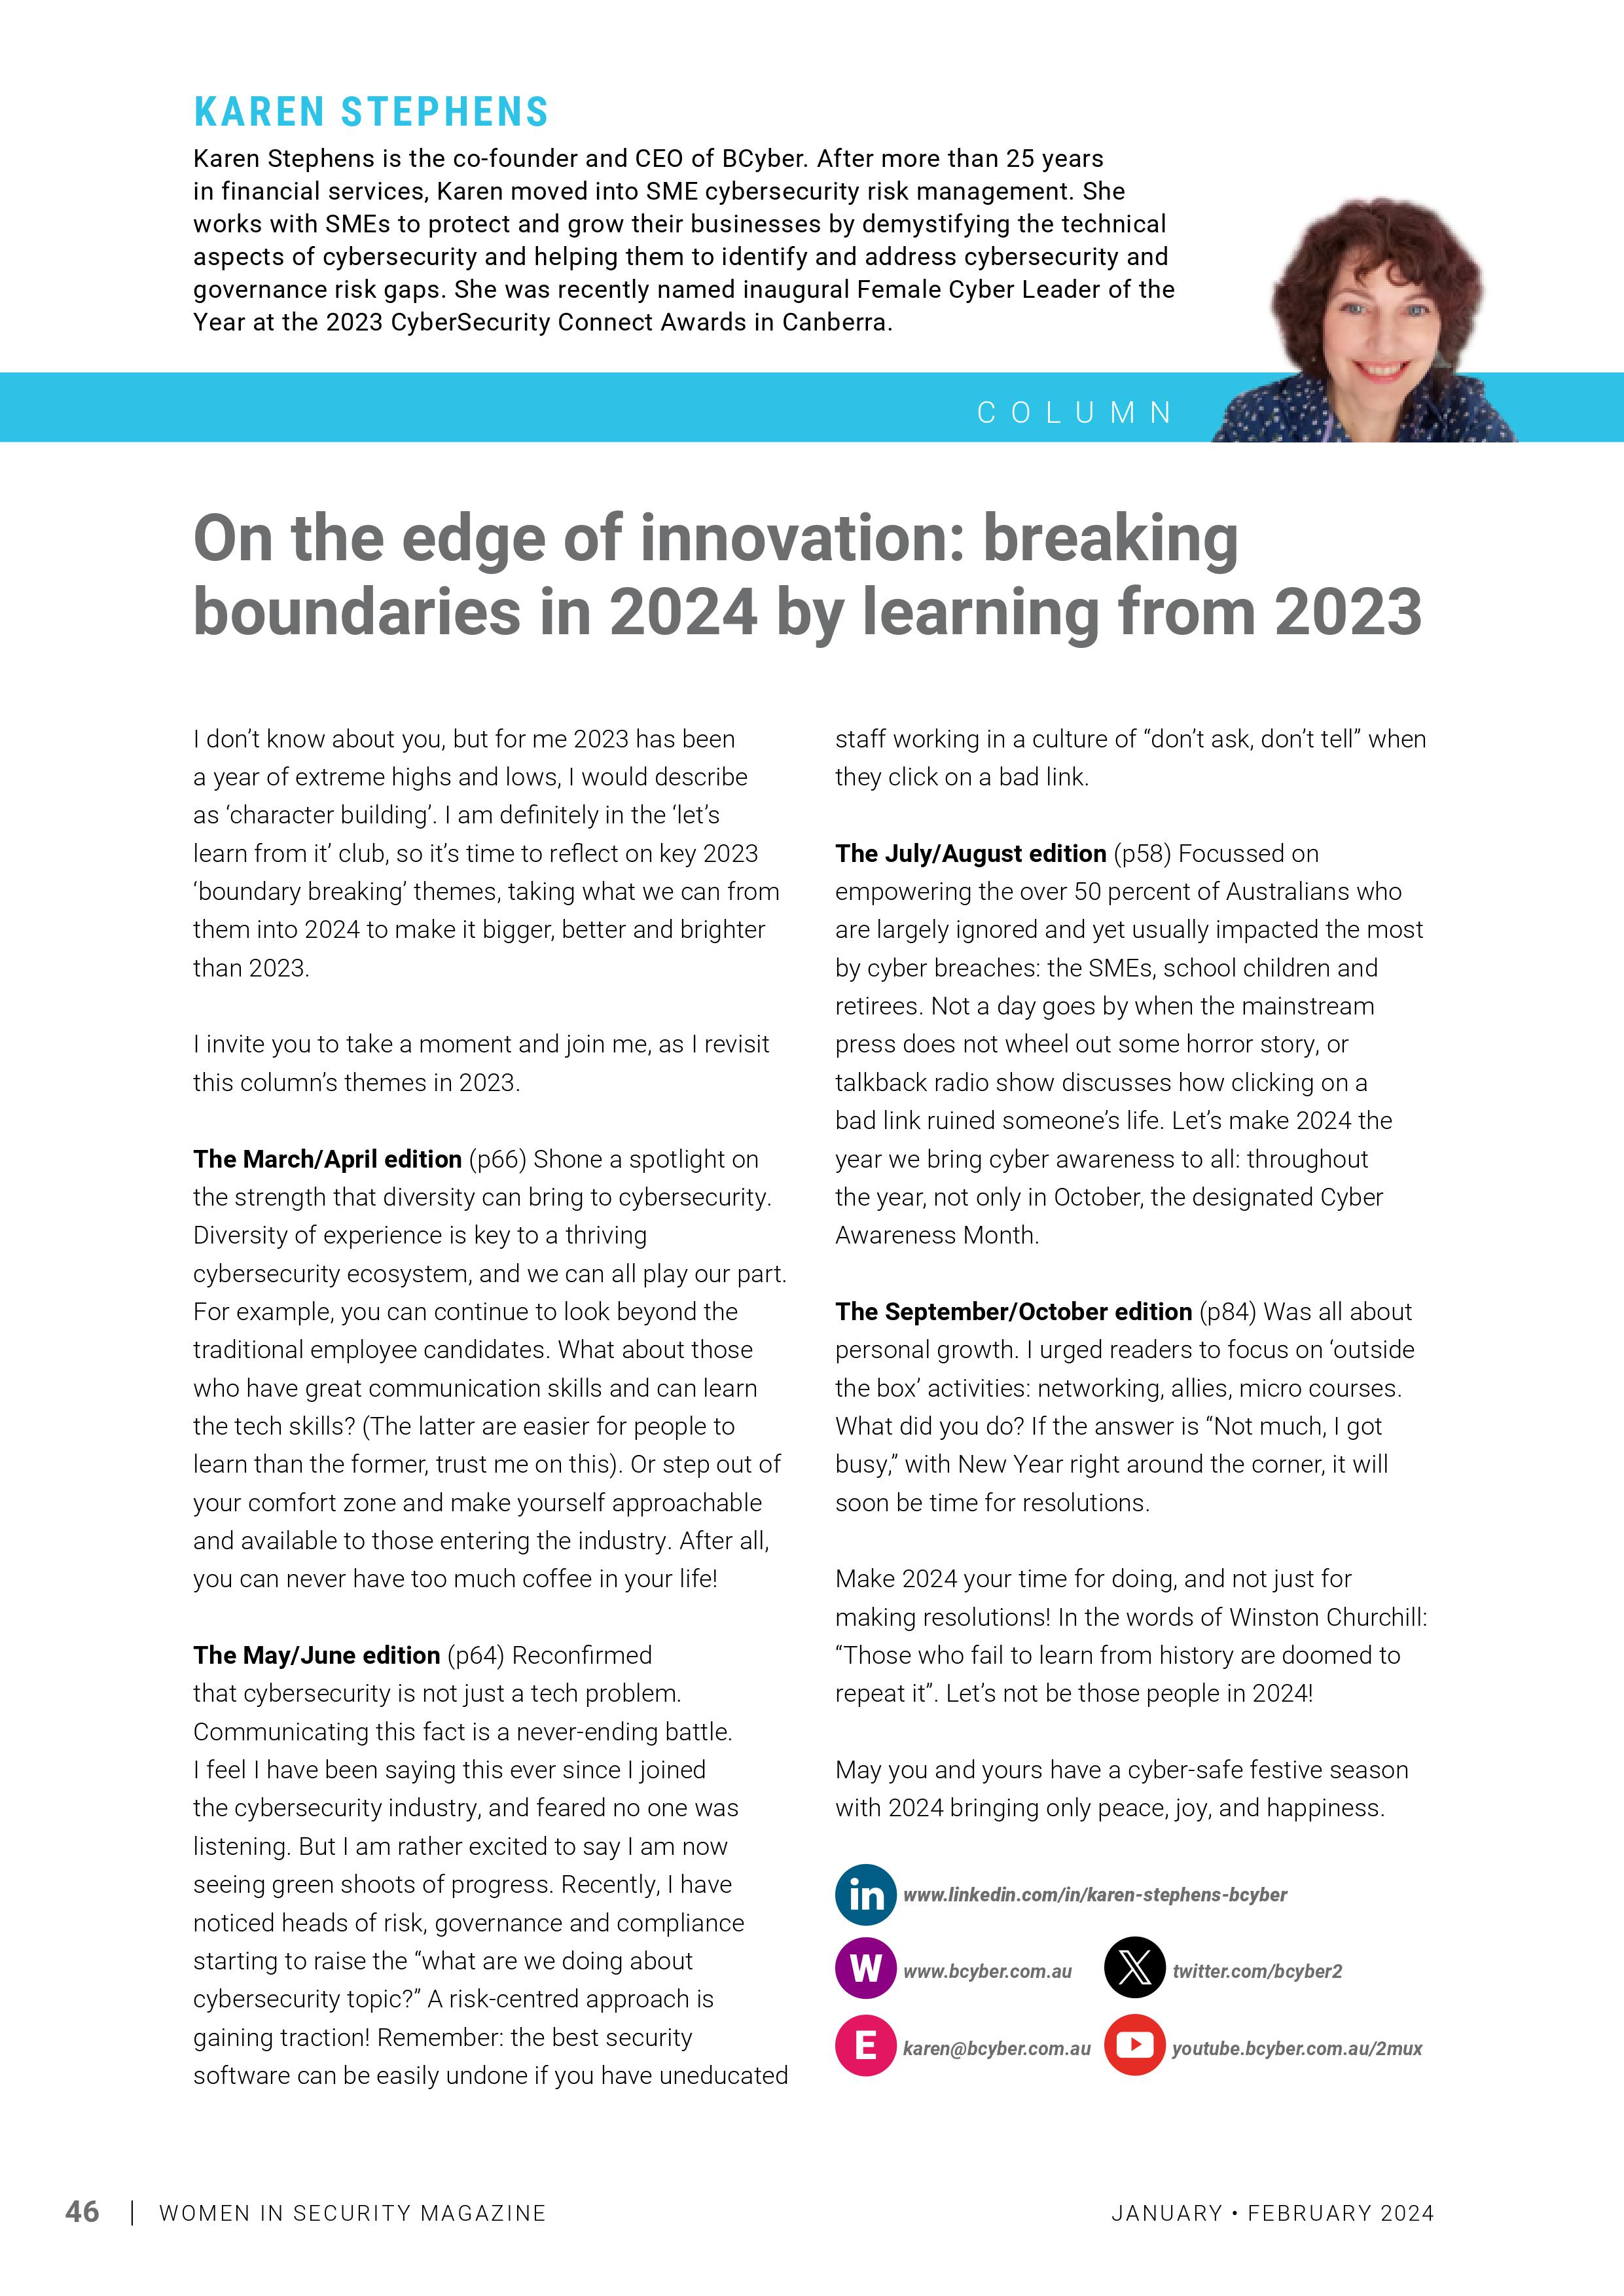 Breaking boundaries in 2024 by learning from 2023 Bcyber